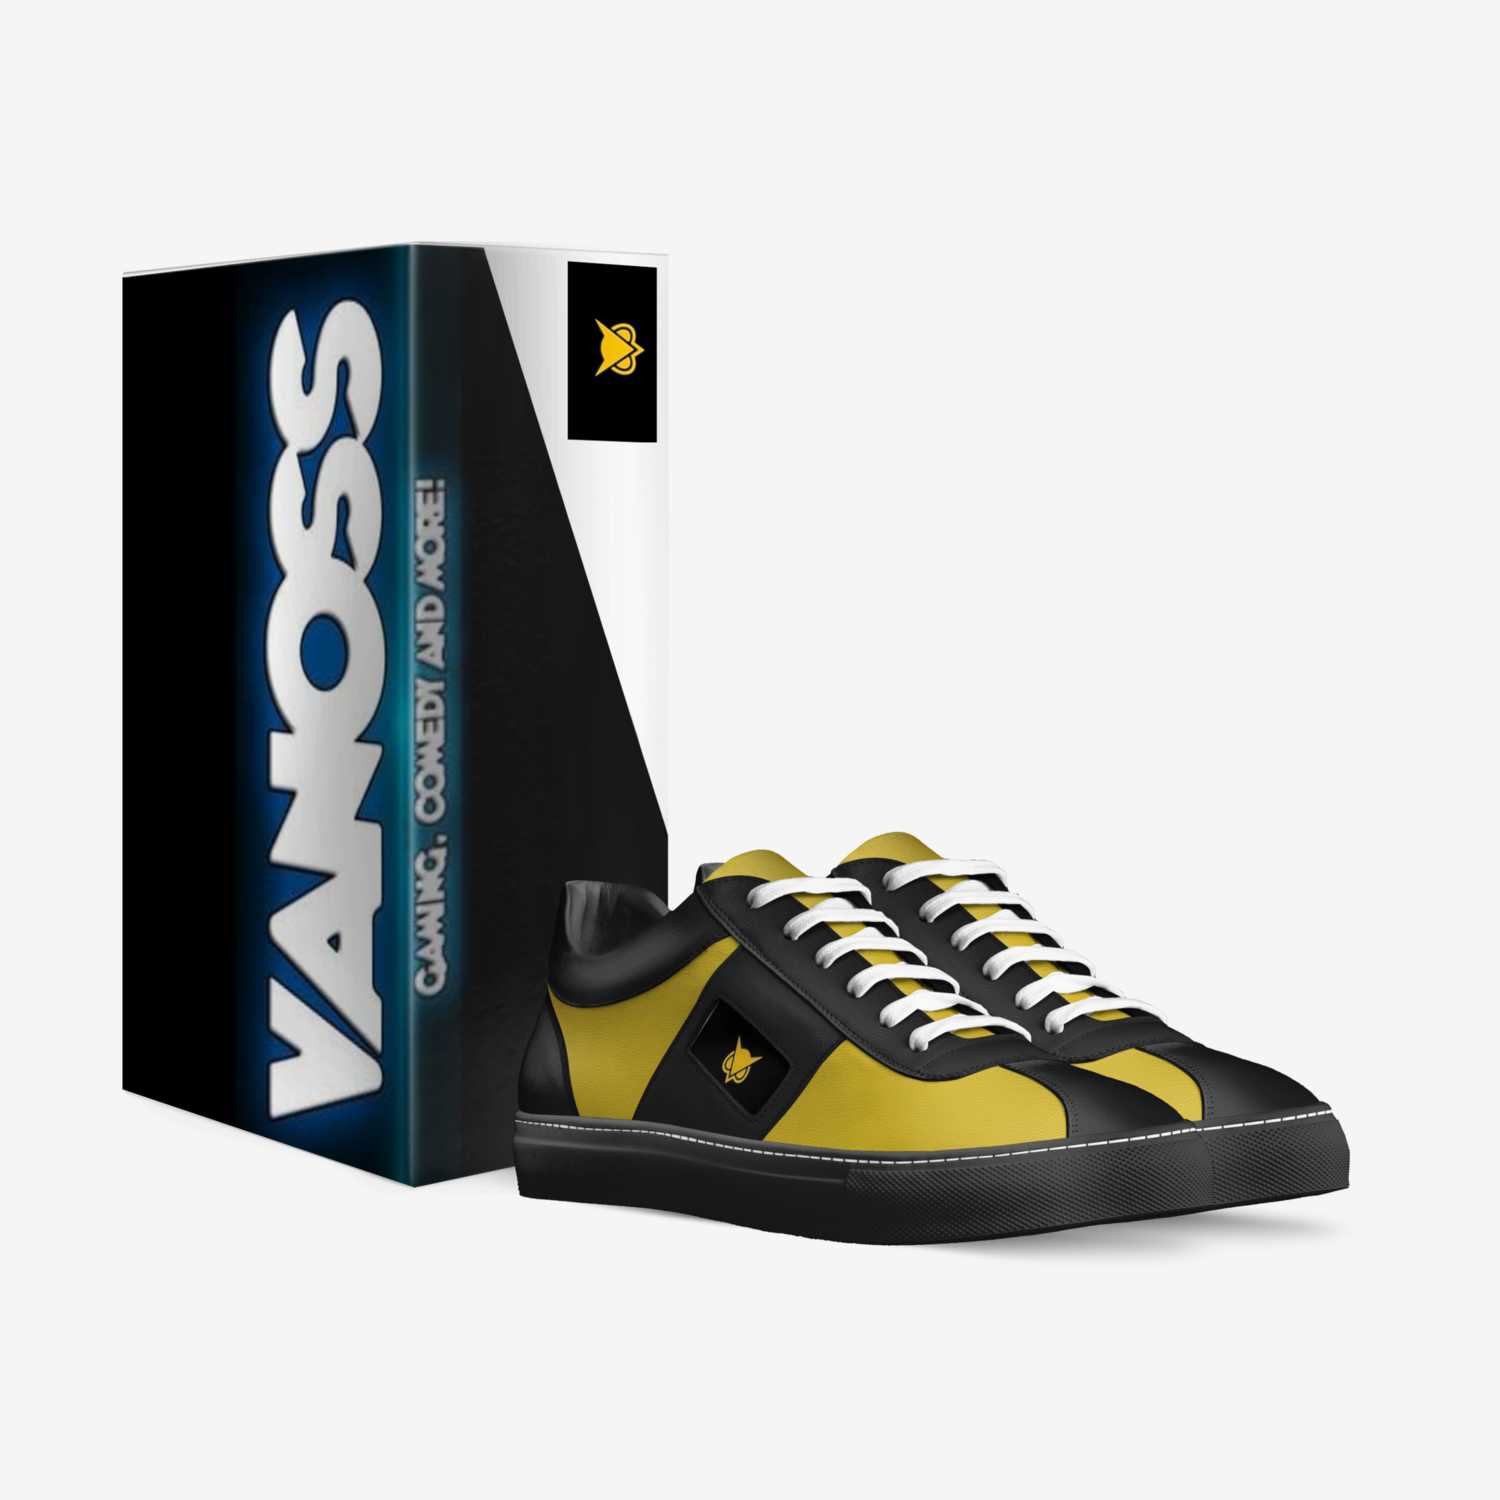 VANOSS GAMING custom made in Italy shoes by Chase Prine | Box view